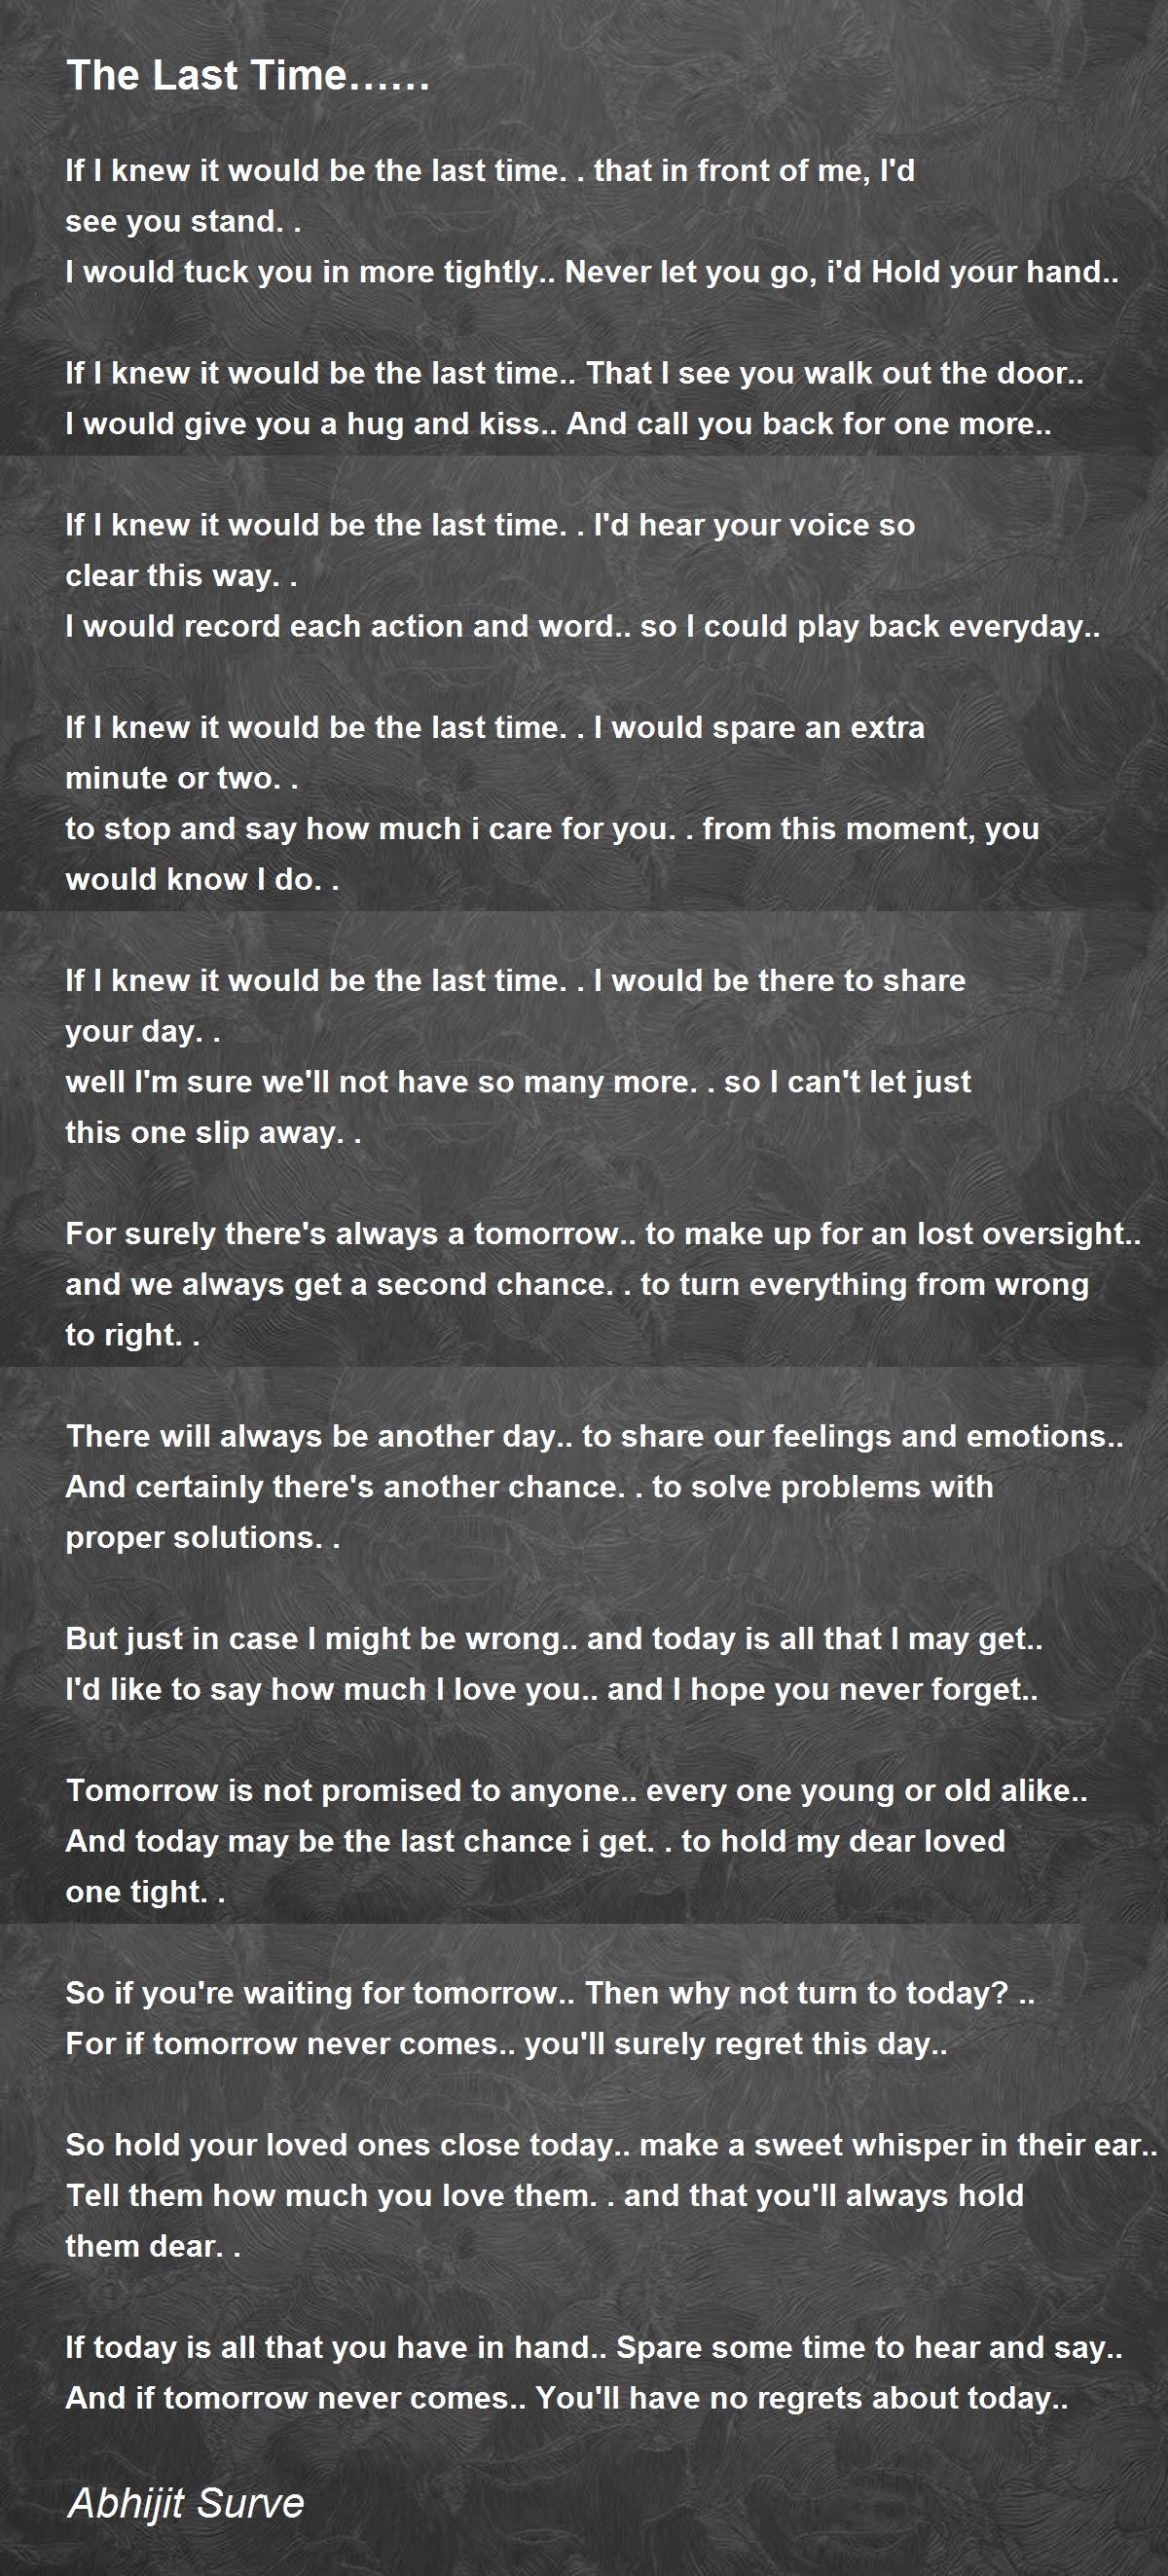 The Last Time The Last Time Poem By Abhijit Surve